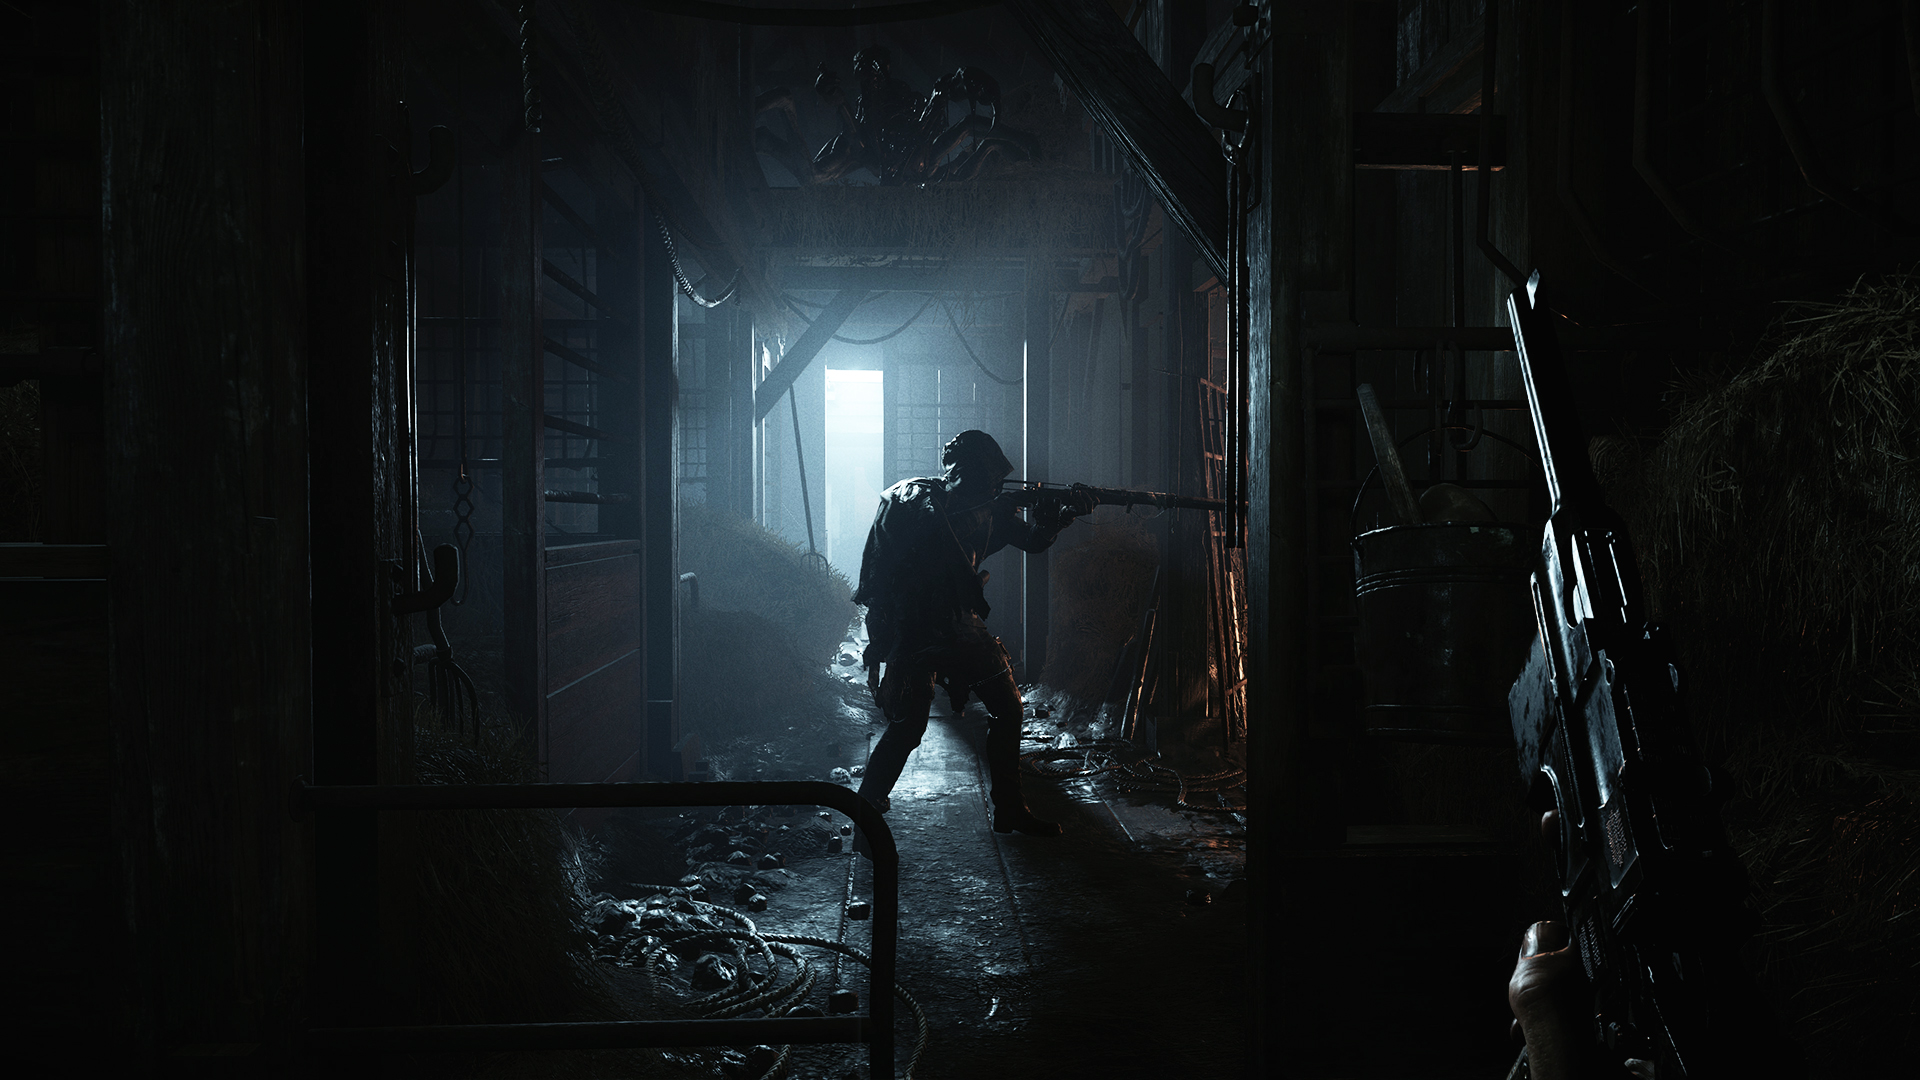 Play Hunt: Showdown this weekend for free on Steam